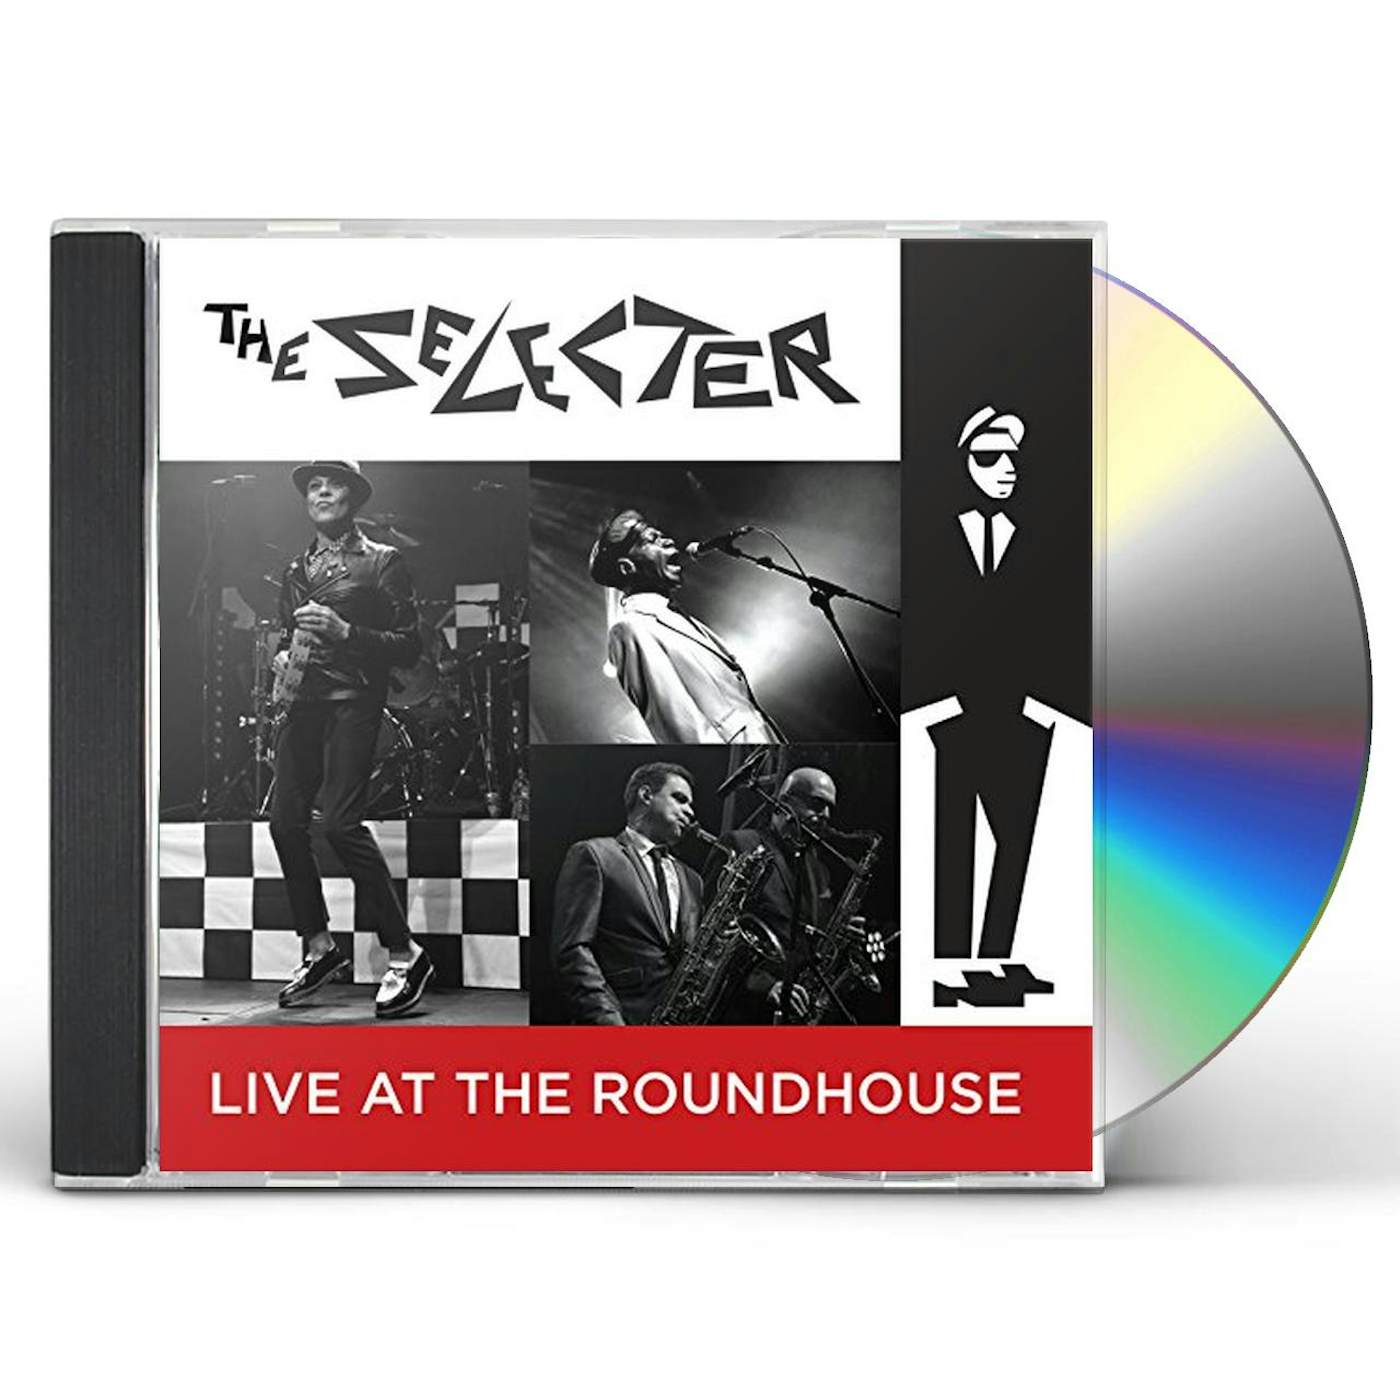 SELECTER LIVE AT THE ROUNDHOUSE (CD+DVD PAL REG2) CD